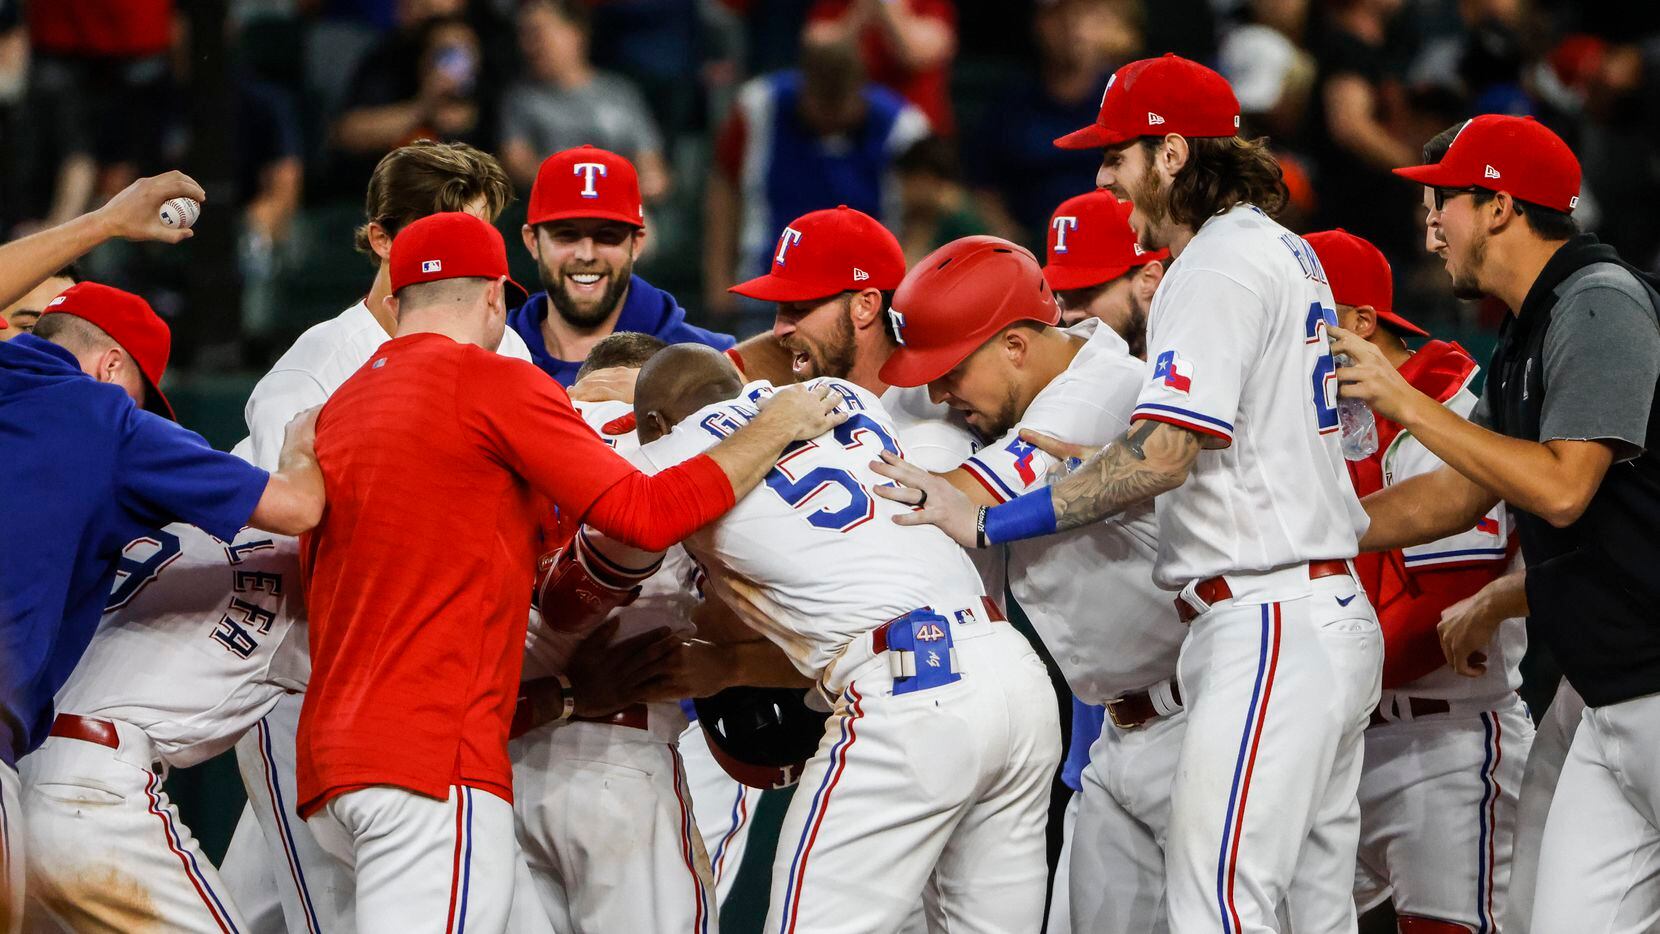 Texas Rangers celebrate after second baseman Brock Holt (16) singles out to centerfield, earning the Rangers a win in the bottom of the eleventh inning against the San Francisco Giants at Globe Life Field in Arlington, Texas, in Dallas on Wednesday, June 9, 2021.